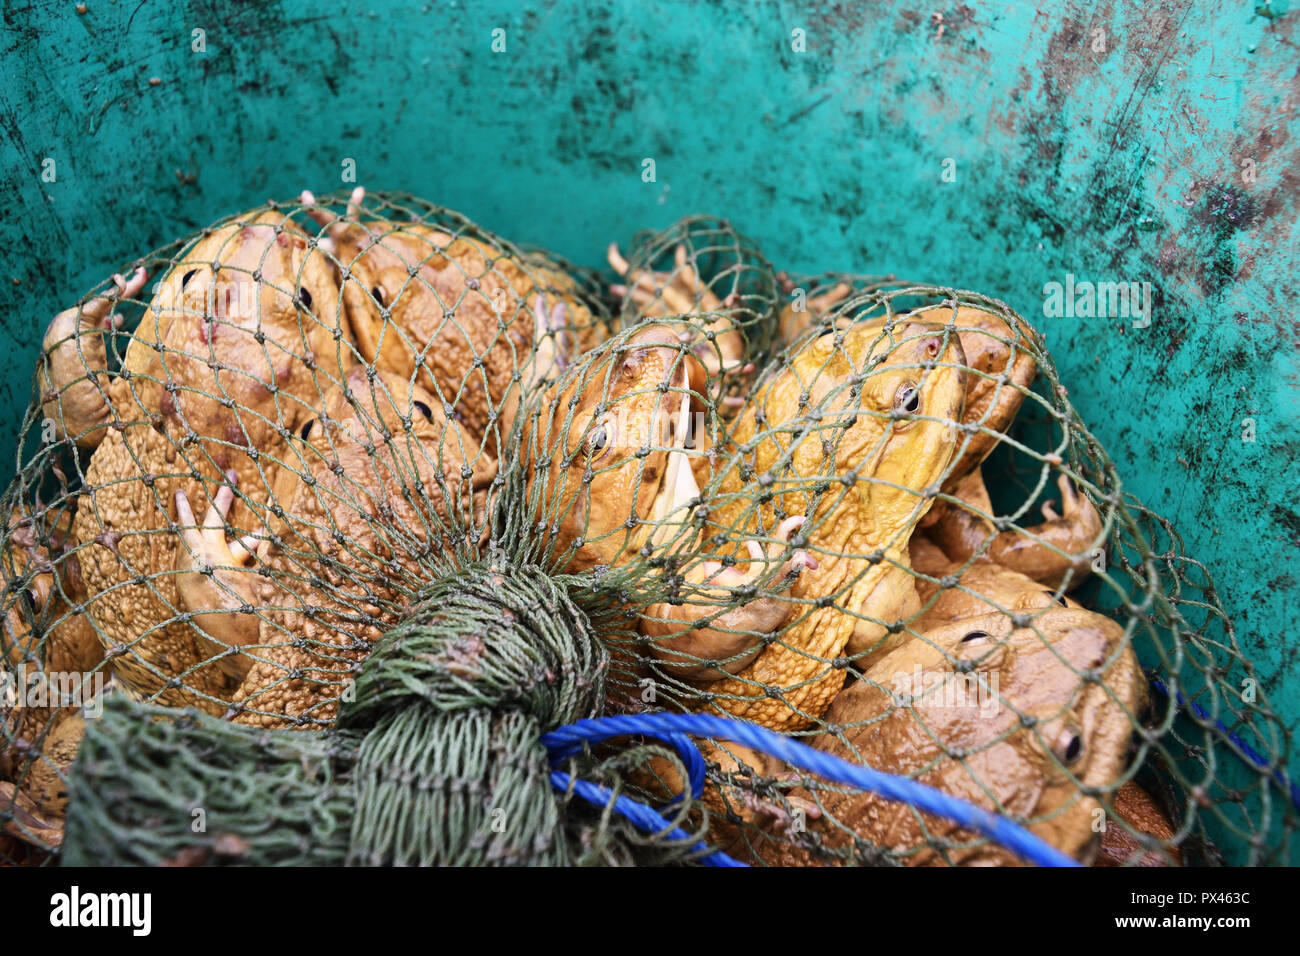 Group of frogs in fishing net and green background, Yellow frog for sale to consumers at market, Exotic food and good meat from amphibians in Thailand Stock Photo